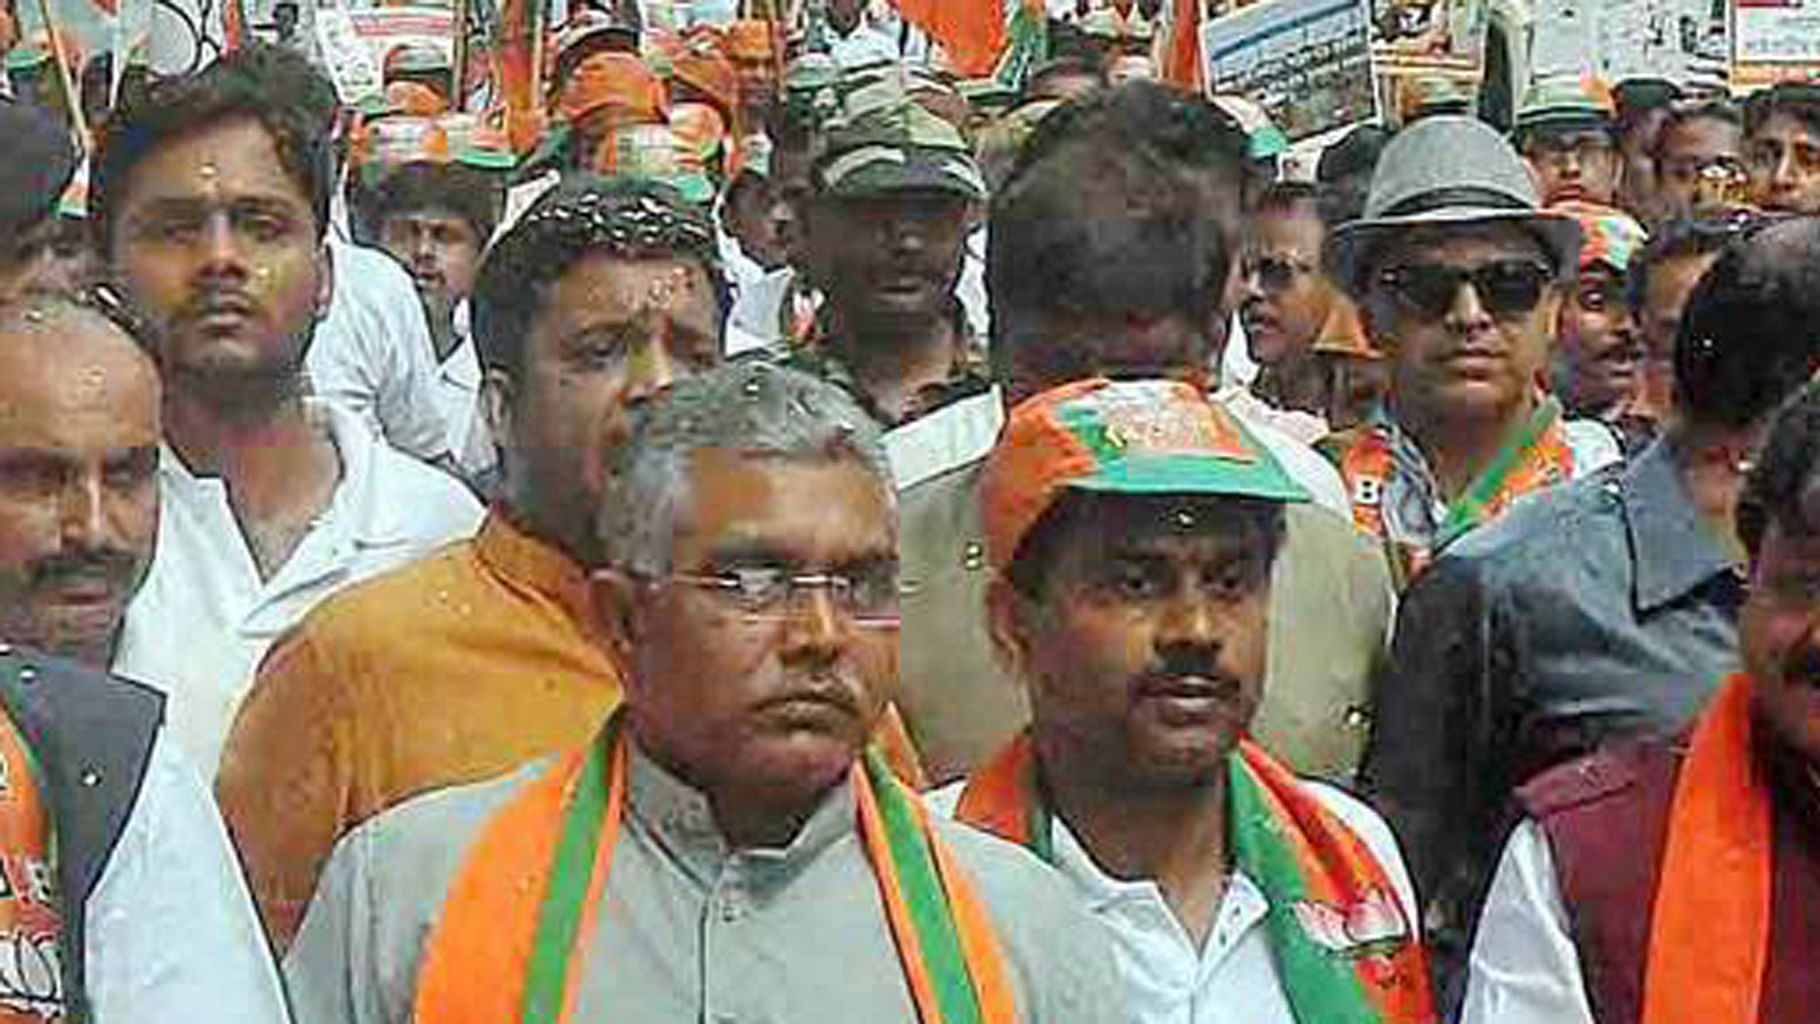 BJP state president Dilip Ghosh and other party leaders in a protest against the state government, at Salt Lake City in Kolkata on Tuesday, 1 March. Photo used for representational purposes.